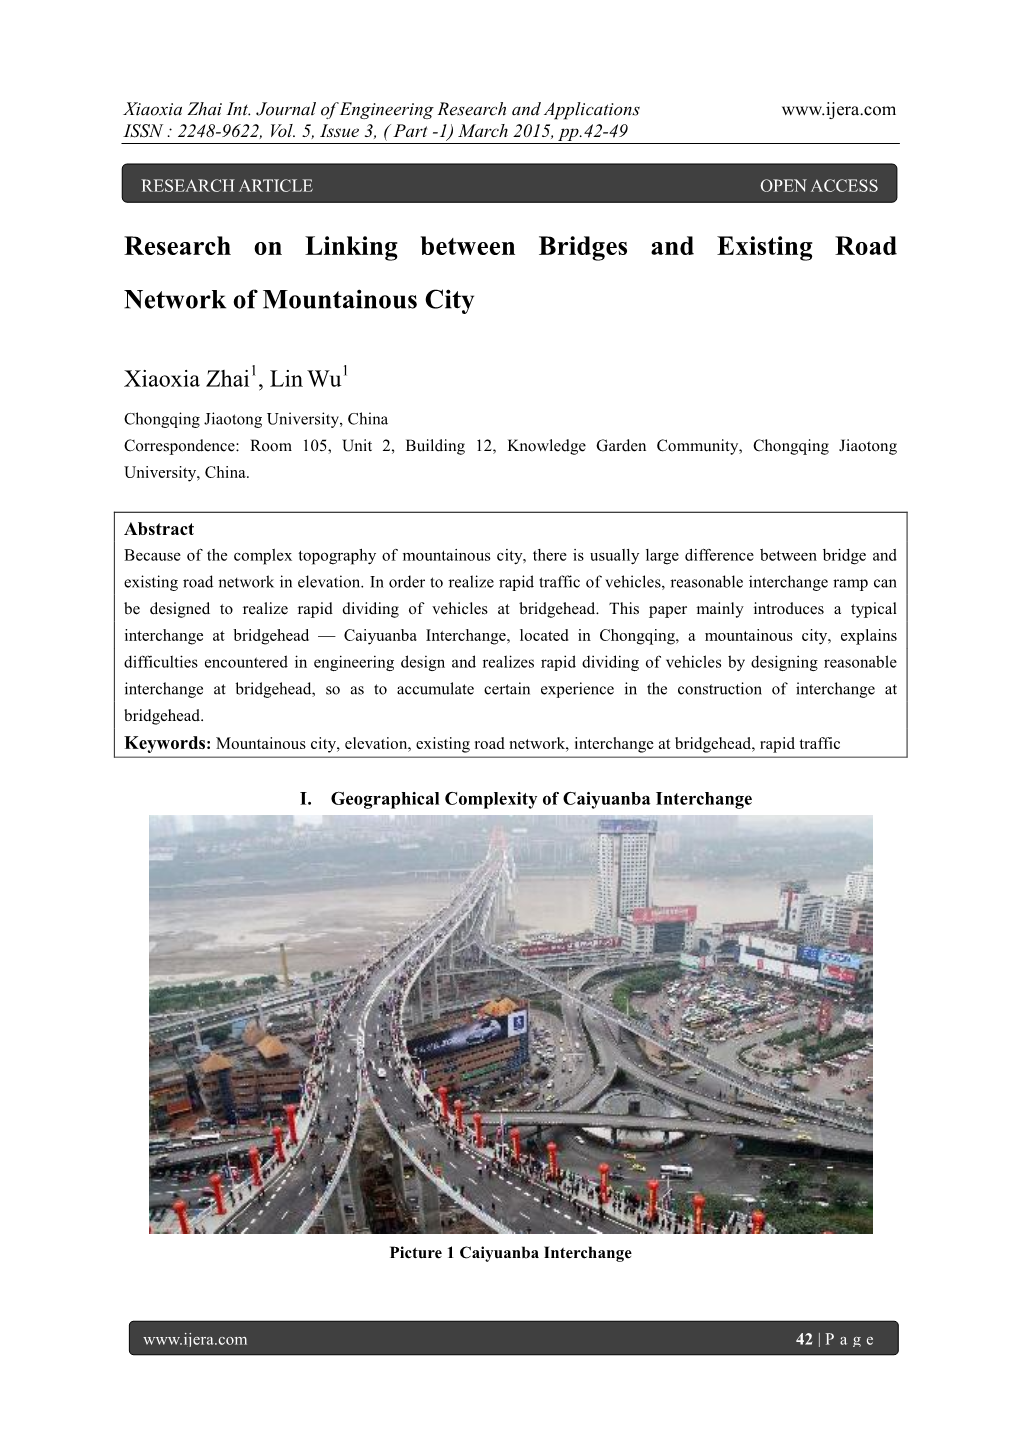 Research on Linking Between Bridges and Existing Road Network of Mountainous City